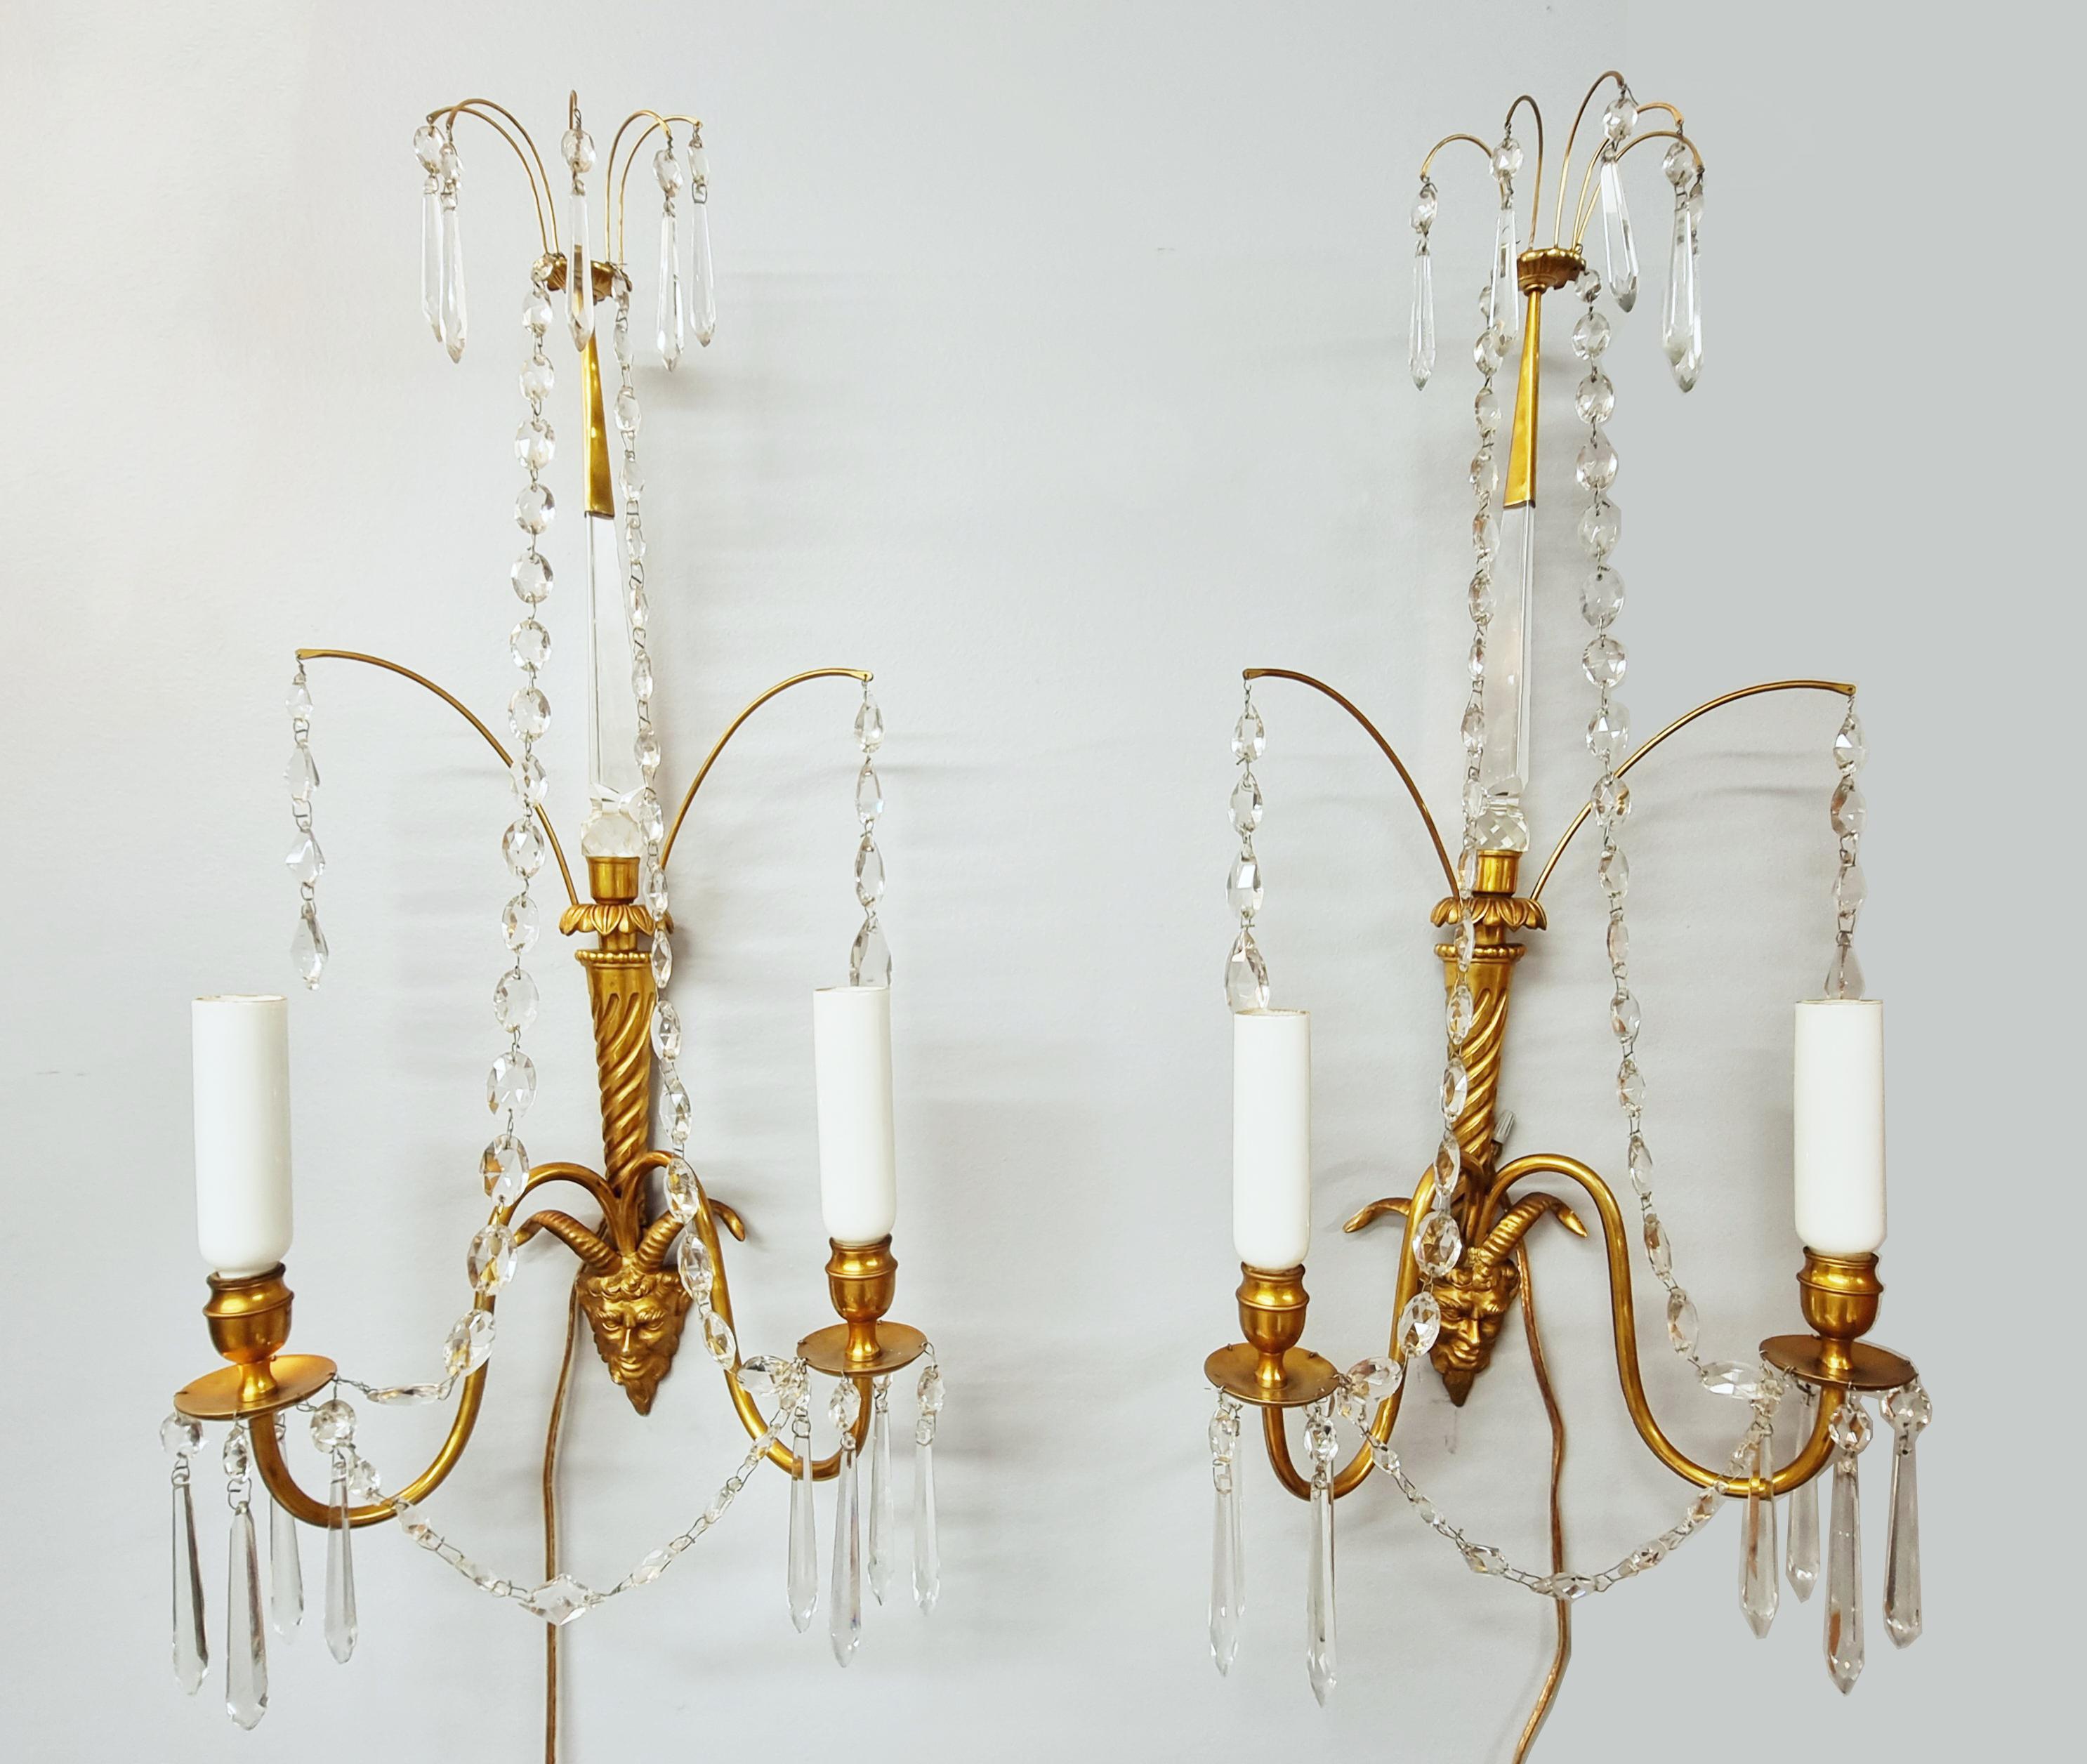 Swedish Pair of Baltic Gilt Satyr Faun Head Wall Sconces, Late 19th / Early 20th Century For Sale